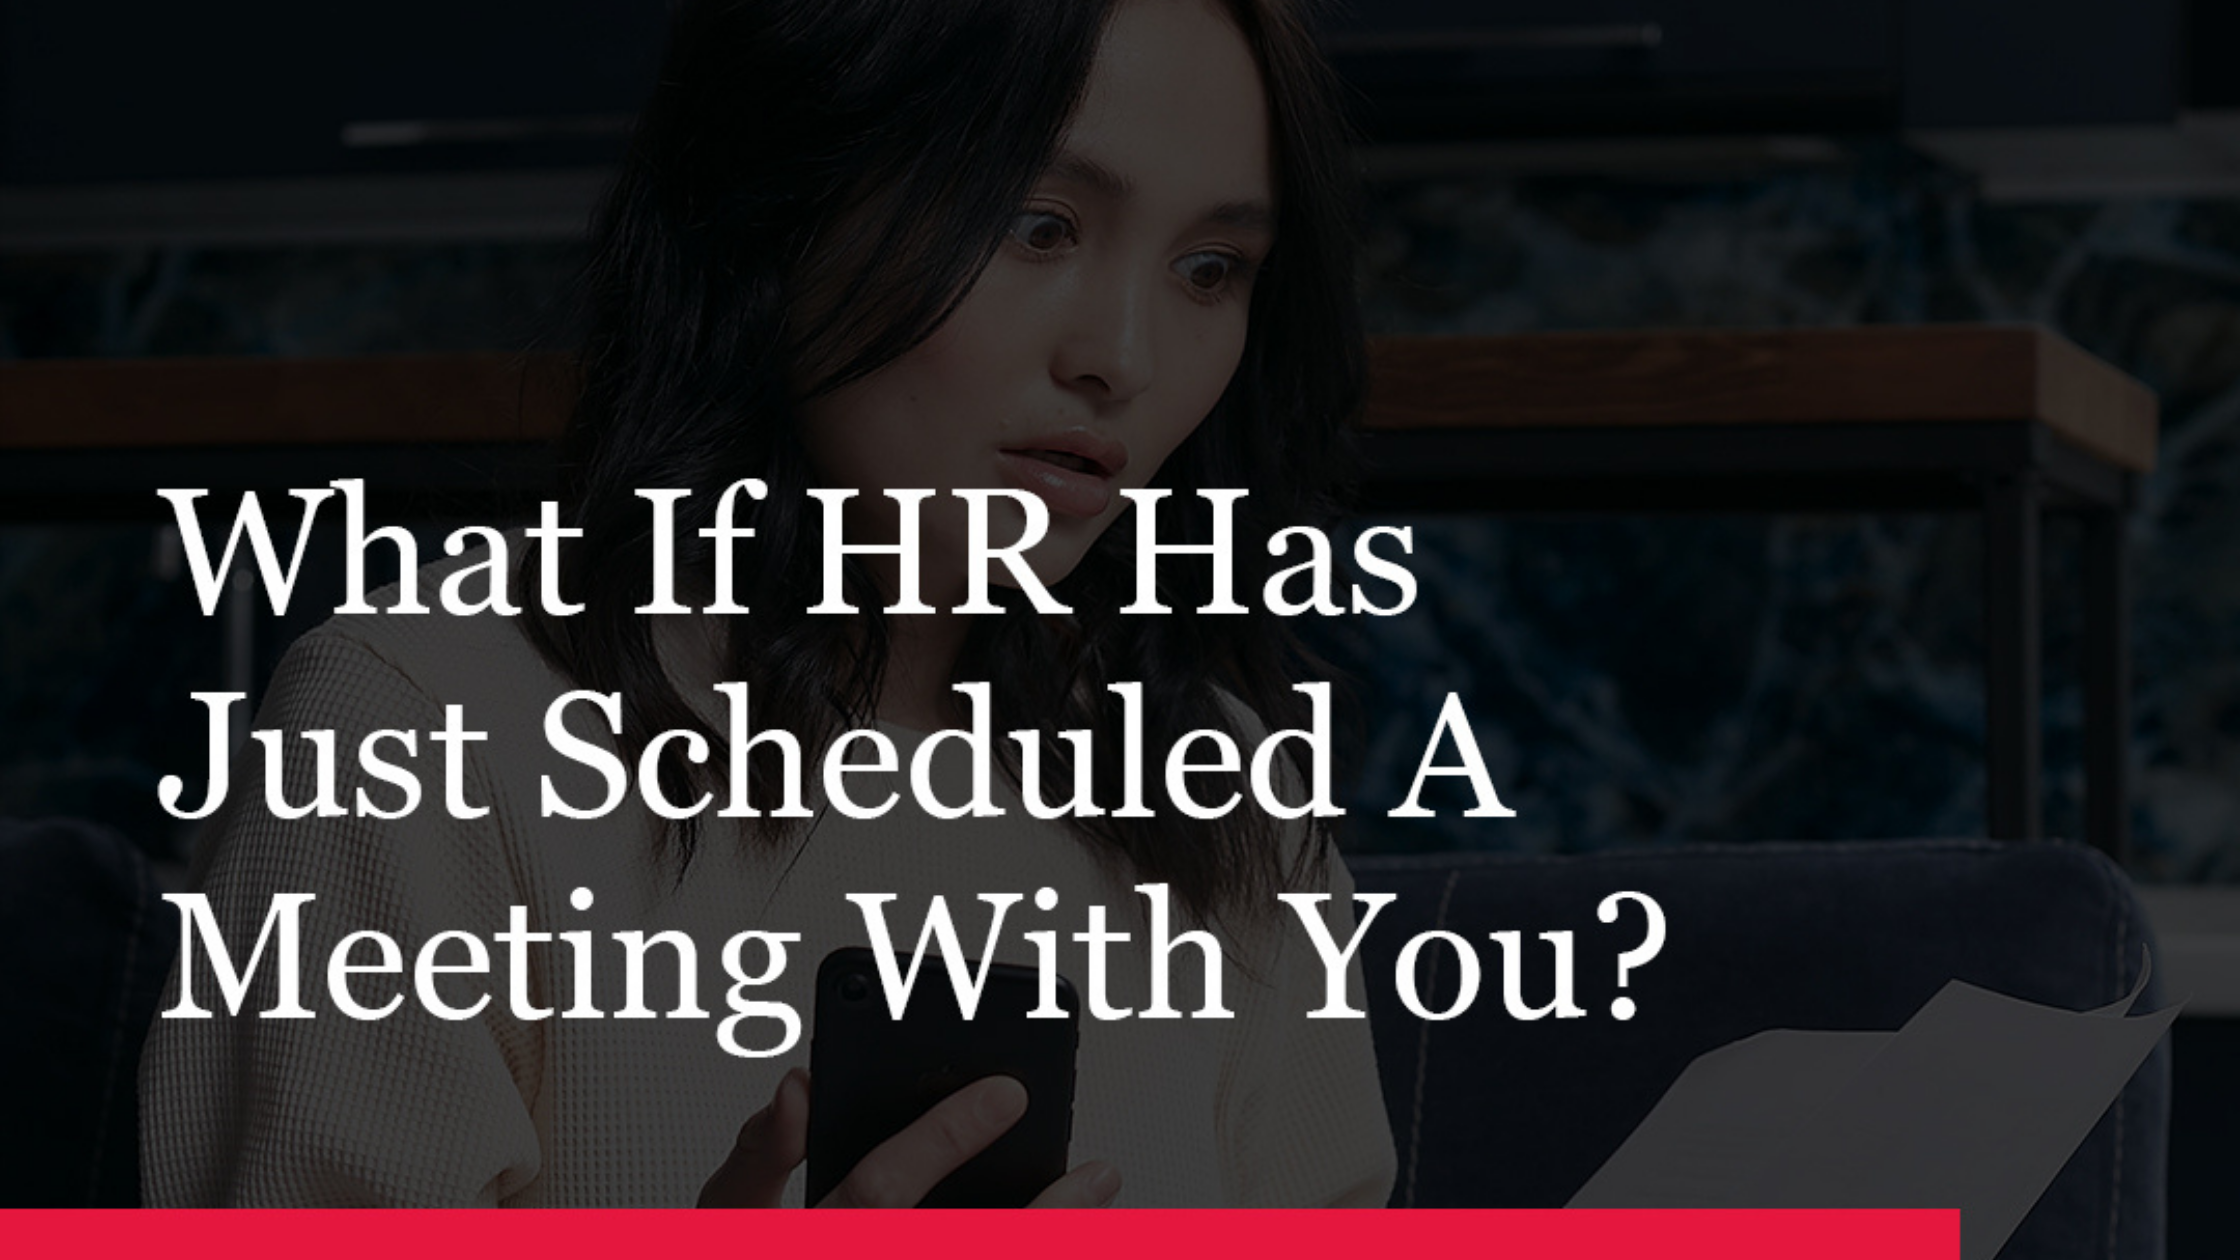 What If HR Has Just Scheduled A Meeting With You?